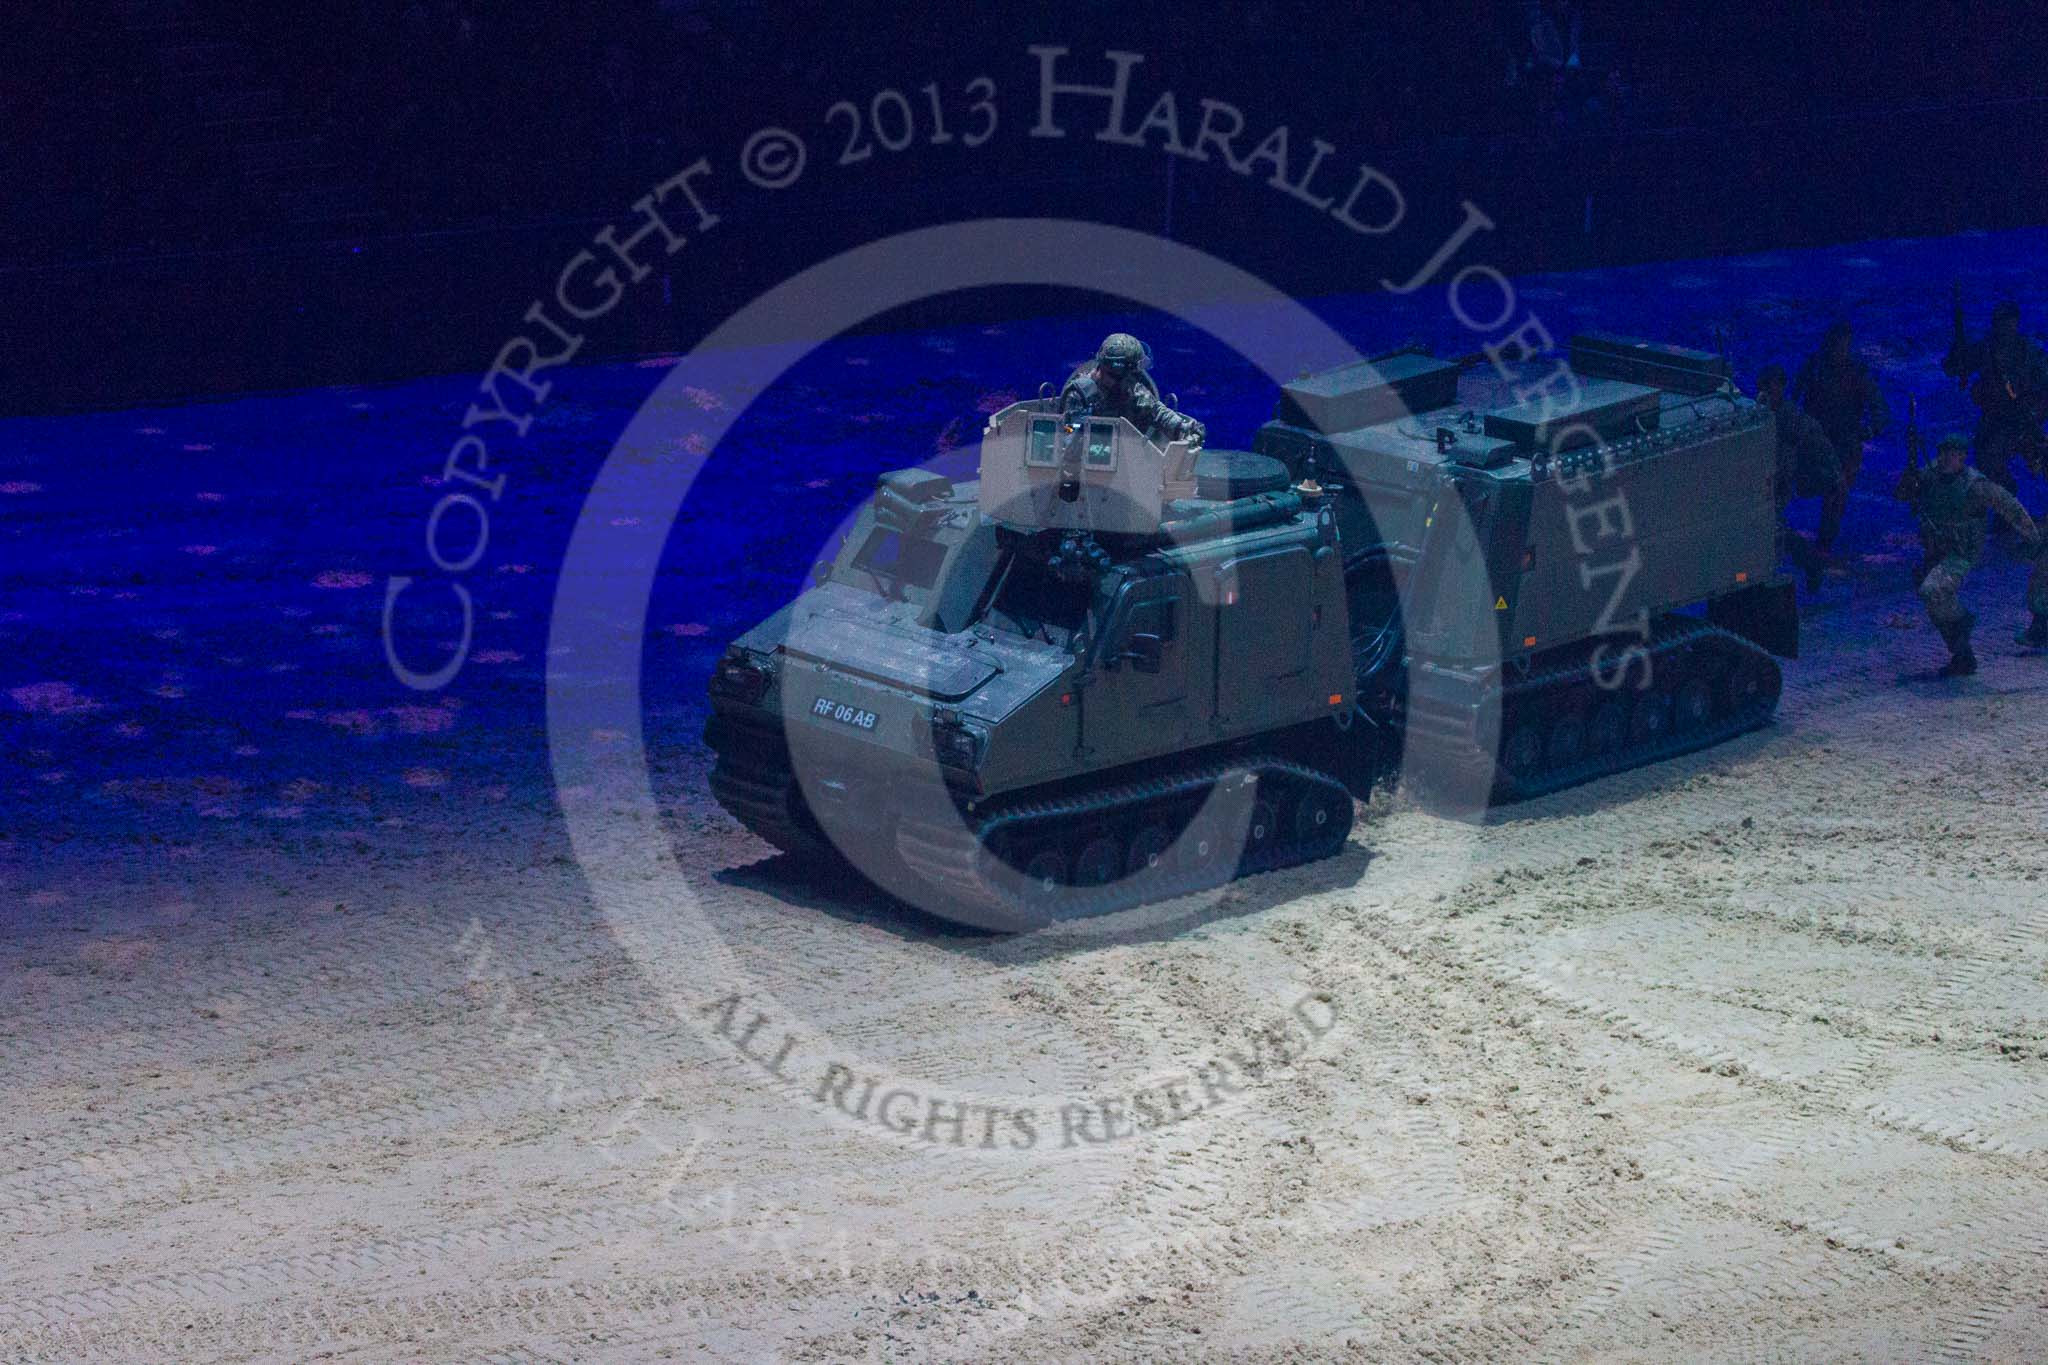 British Military Tournament 2013.
Earls Court,
London SW5,

United Kingdom,
on 06 December 2013 at 16:36, image #456